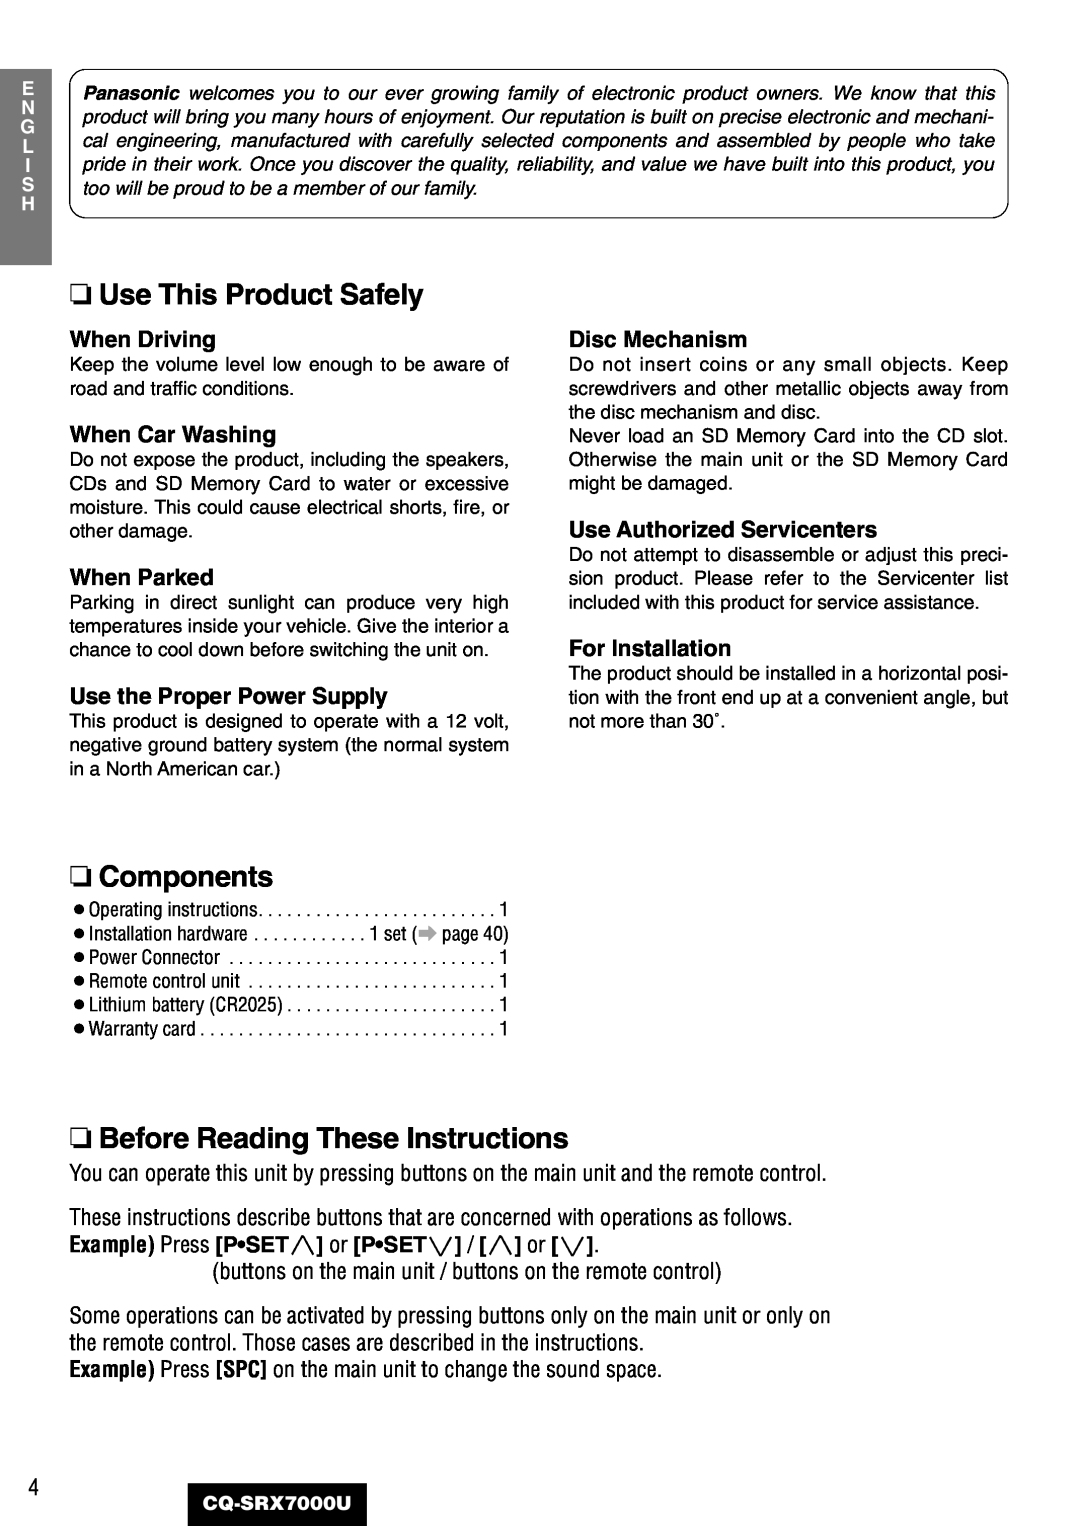 Panasonic CQ-SRX7000U Use This Product Safely, Components, Before Reading These Instructions, When Driving, When Parked 